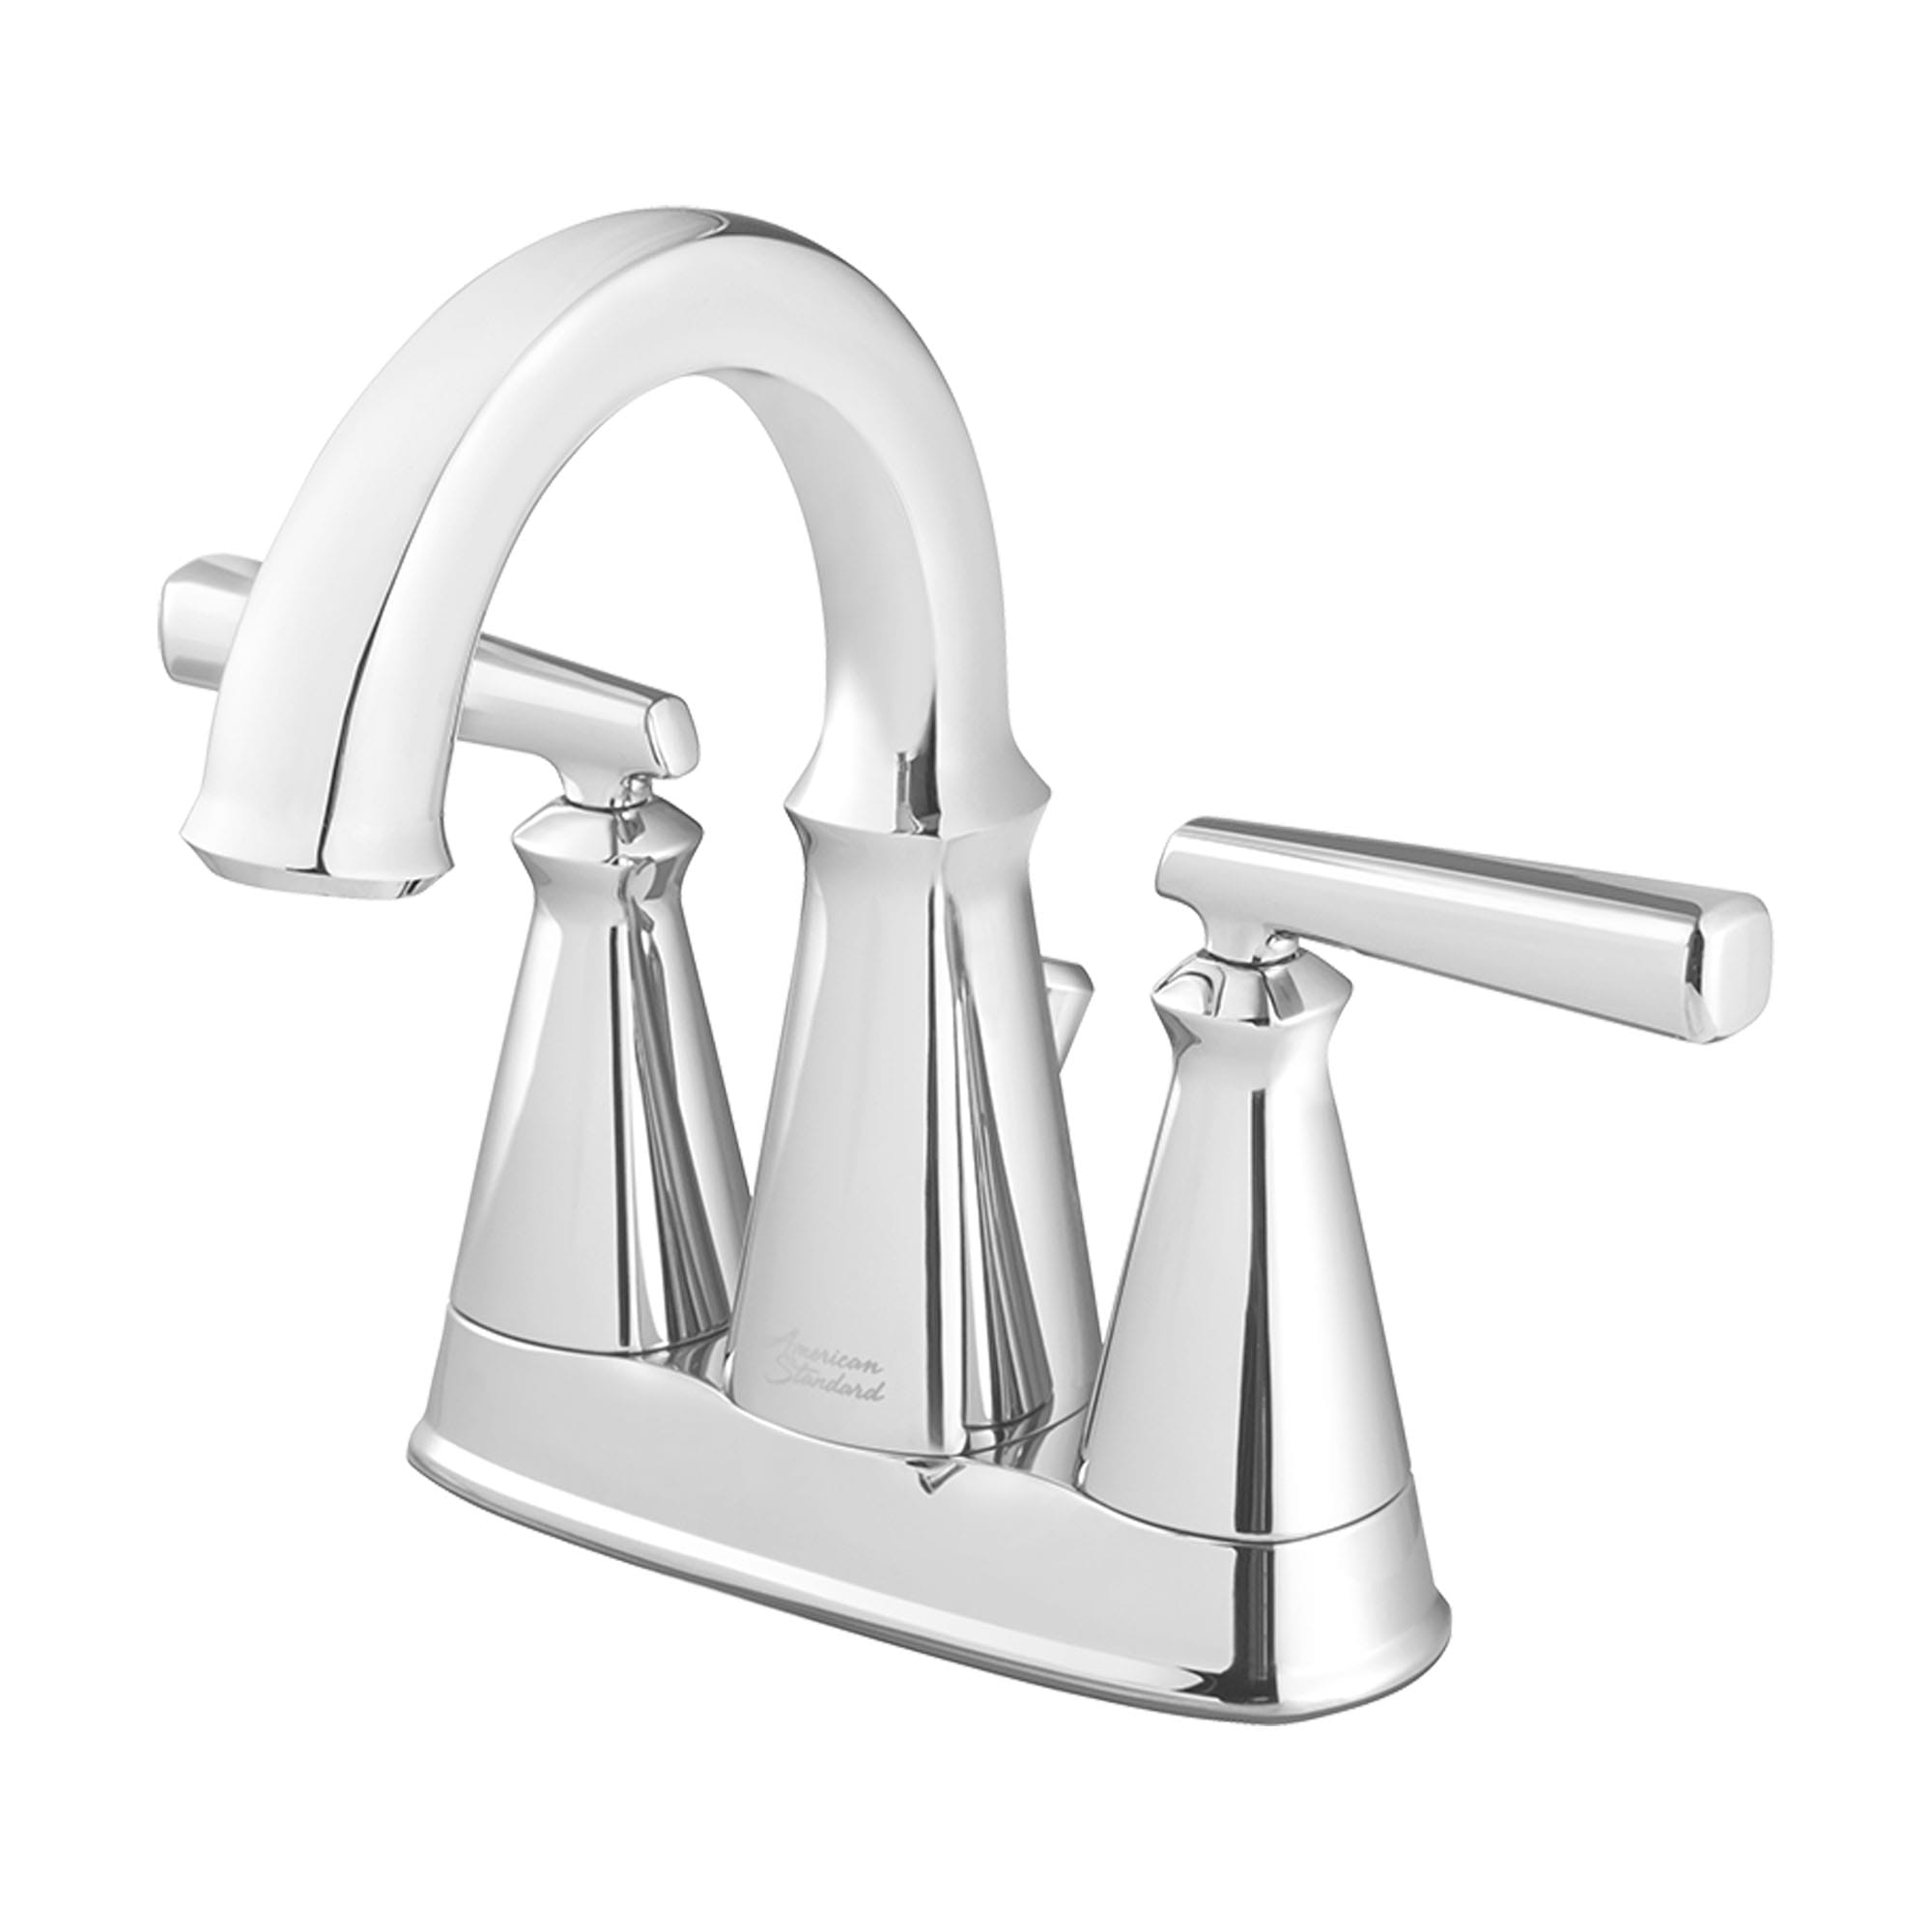 Edgemere® 4-Inch Centerset 2-Handle Bathroom Faucet 1.2 gmp/4.5 L/min With Lever Handles